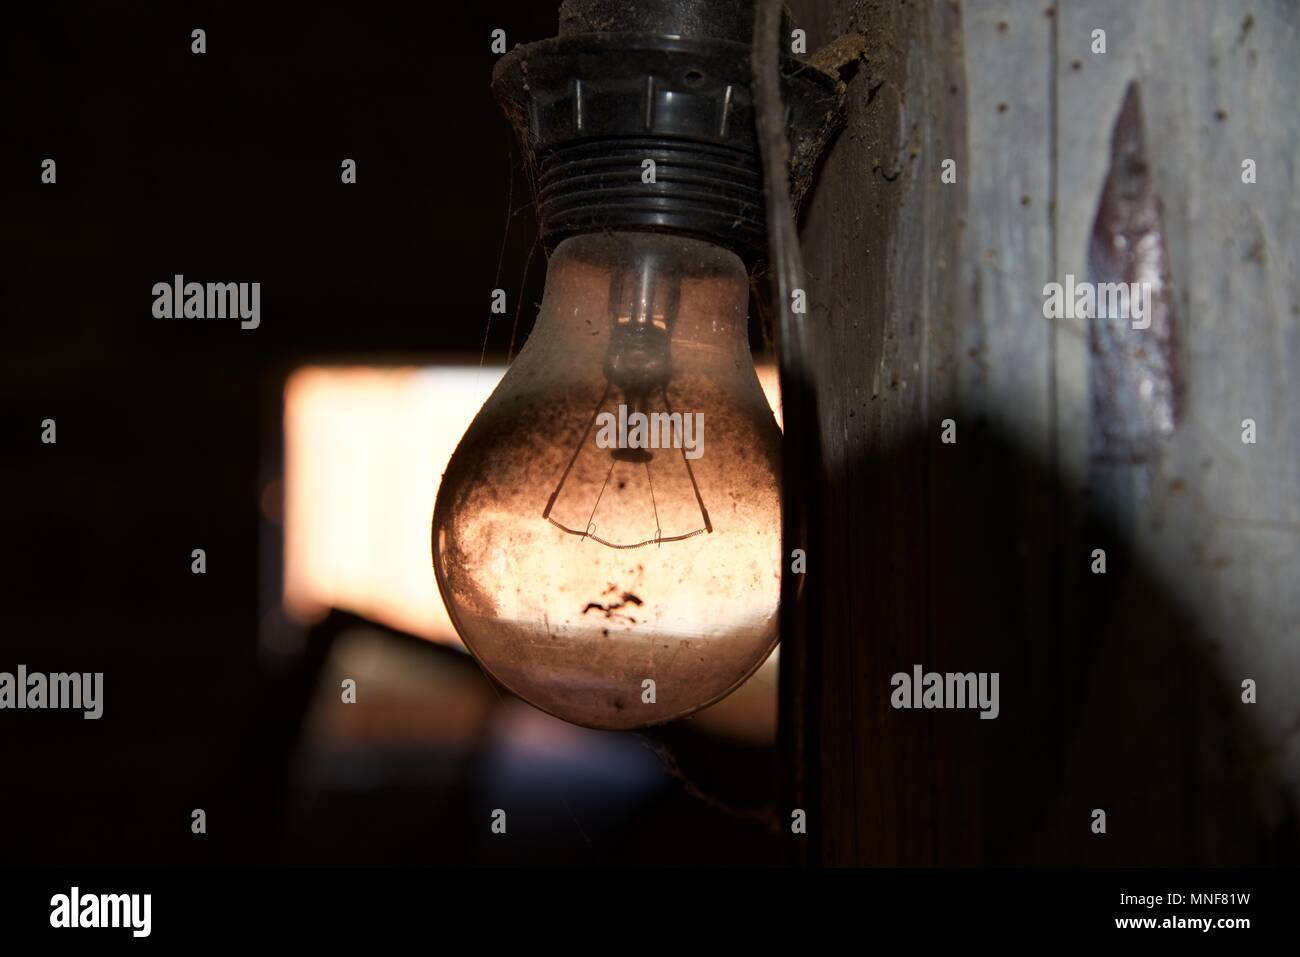 Electric light bulb: a grubby light bulb in an abandoned workshop Stock Photo